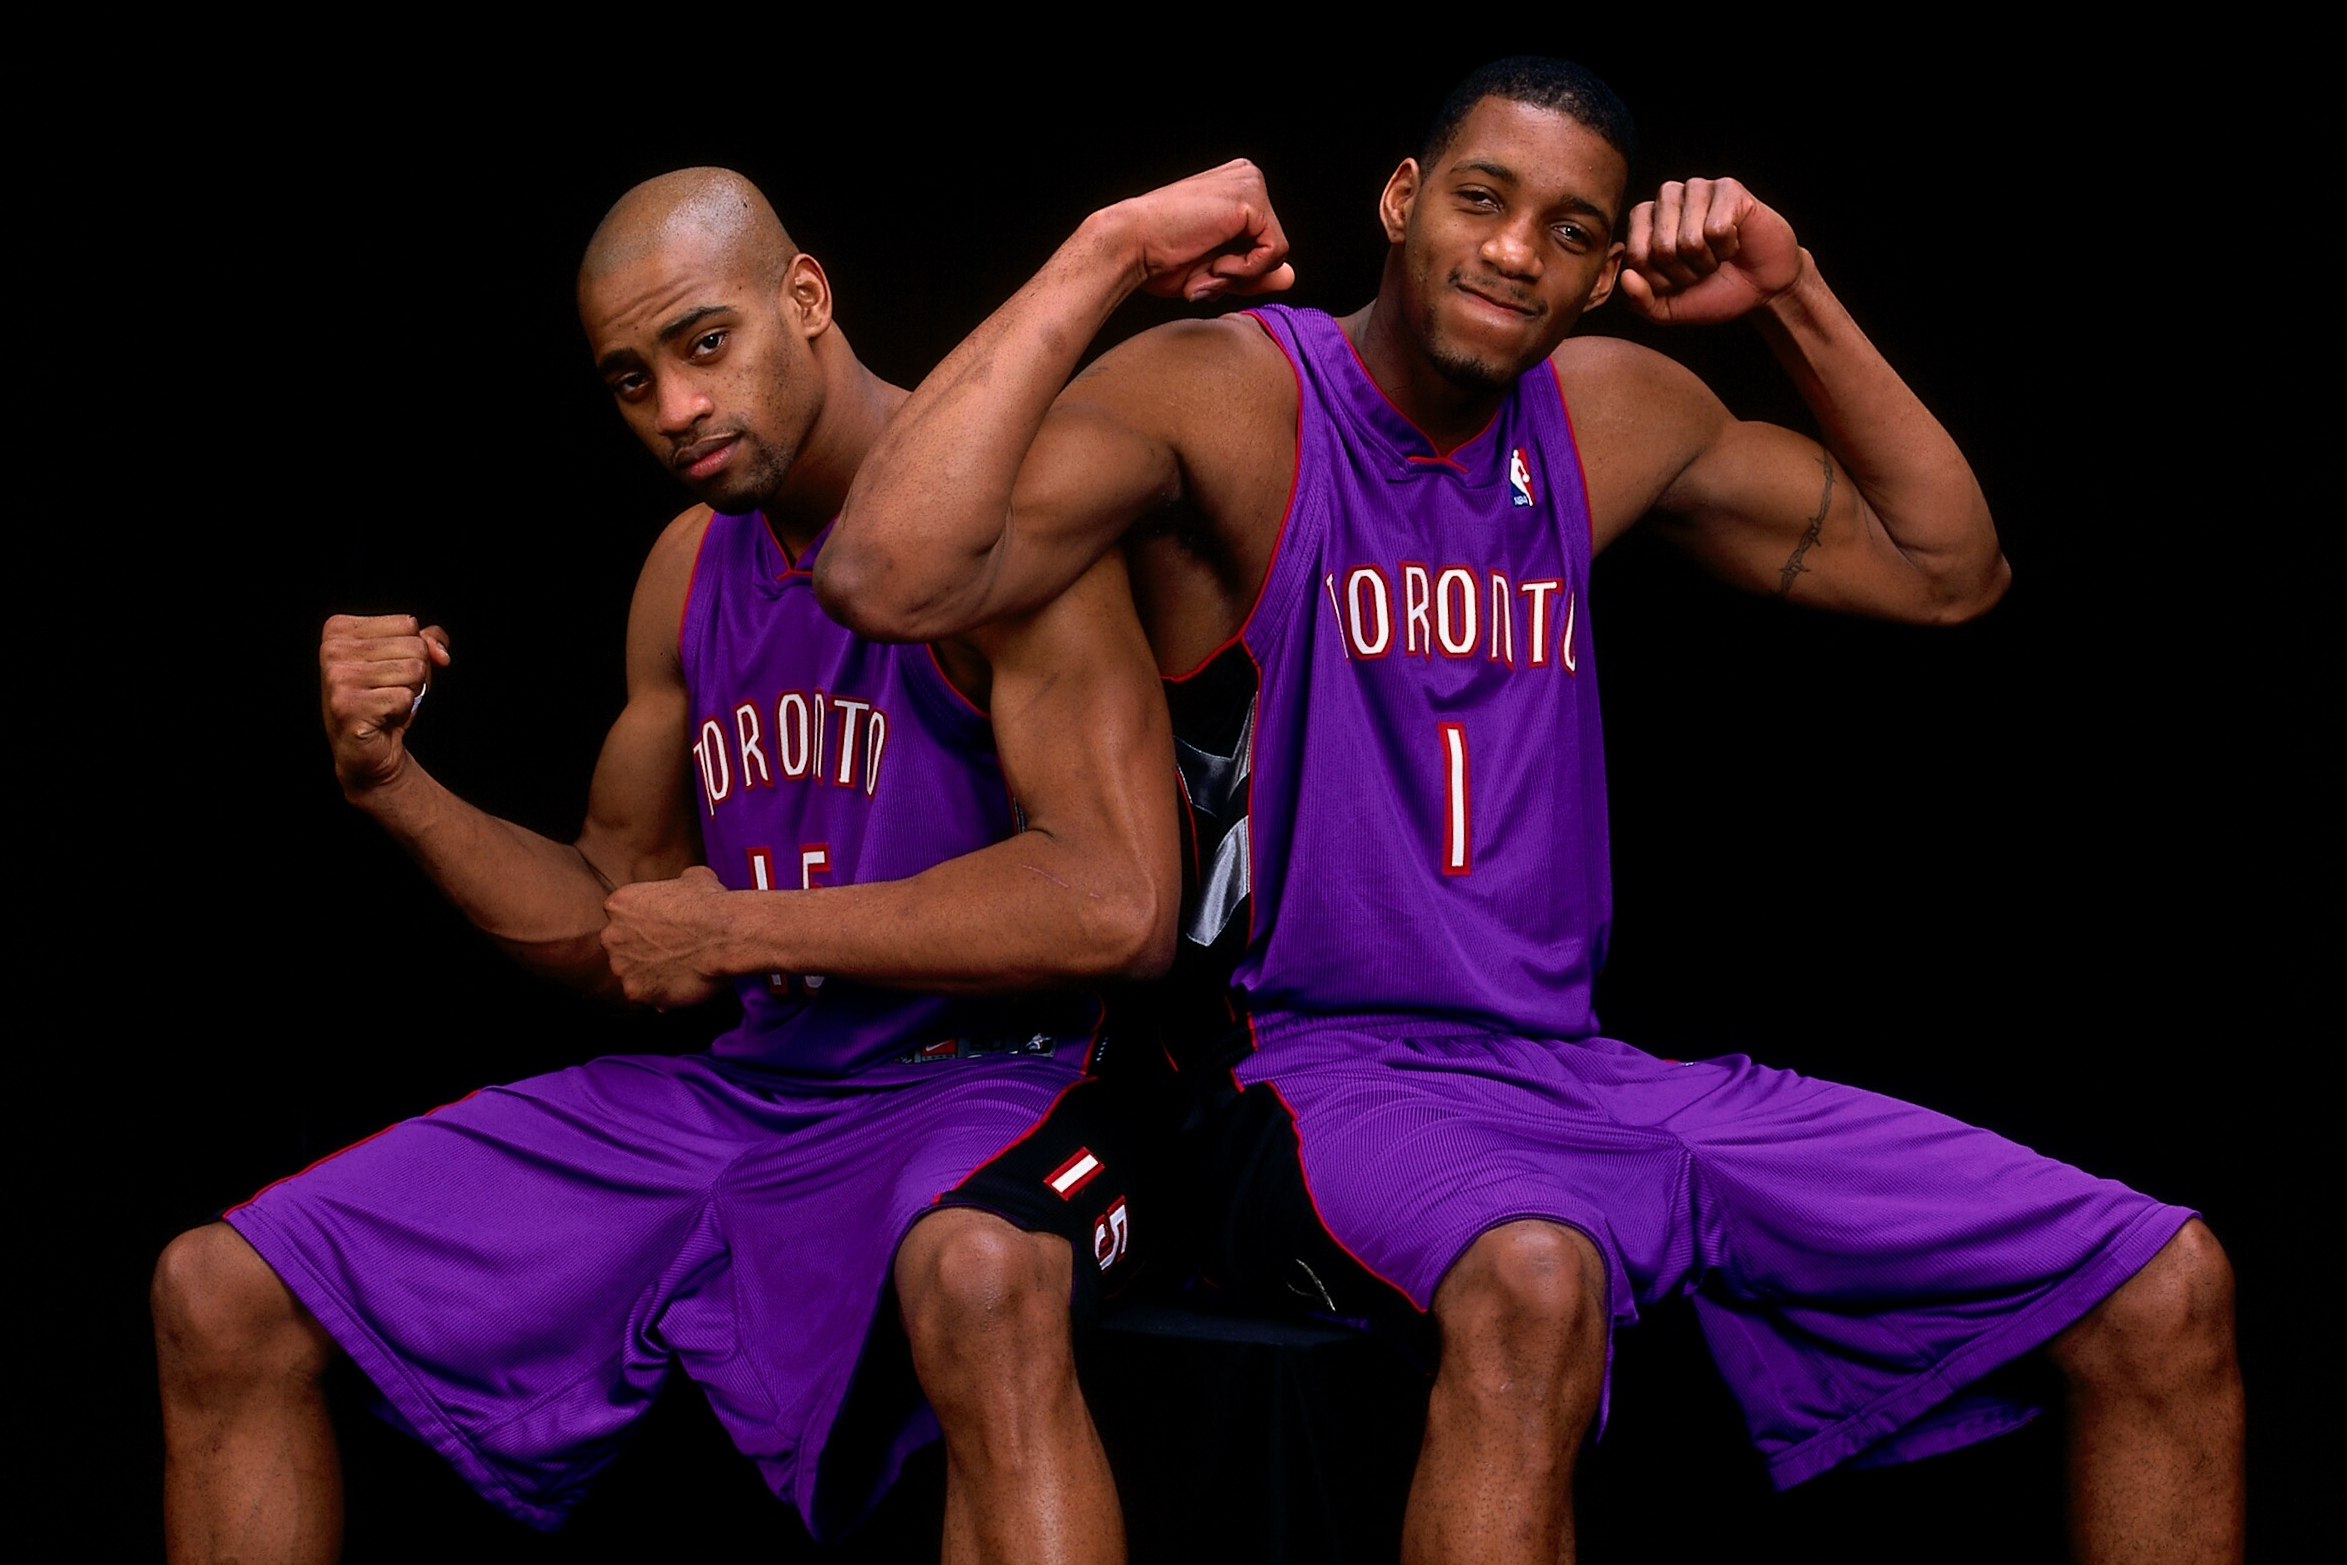 What if Tracy McGrady and Vince Carter became a superstar duo in Toronto?